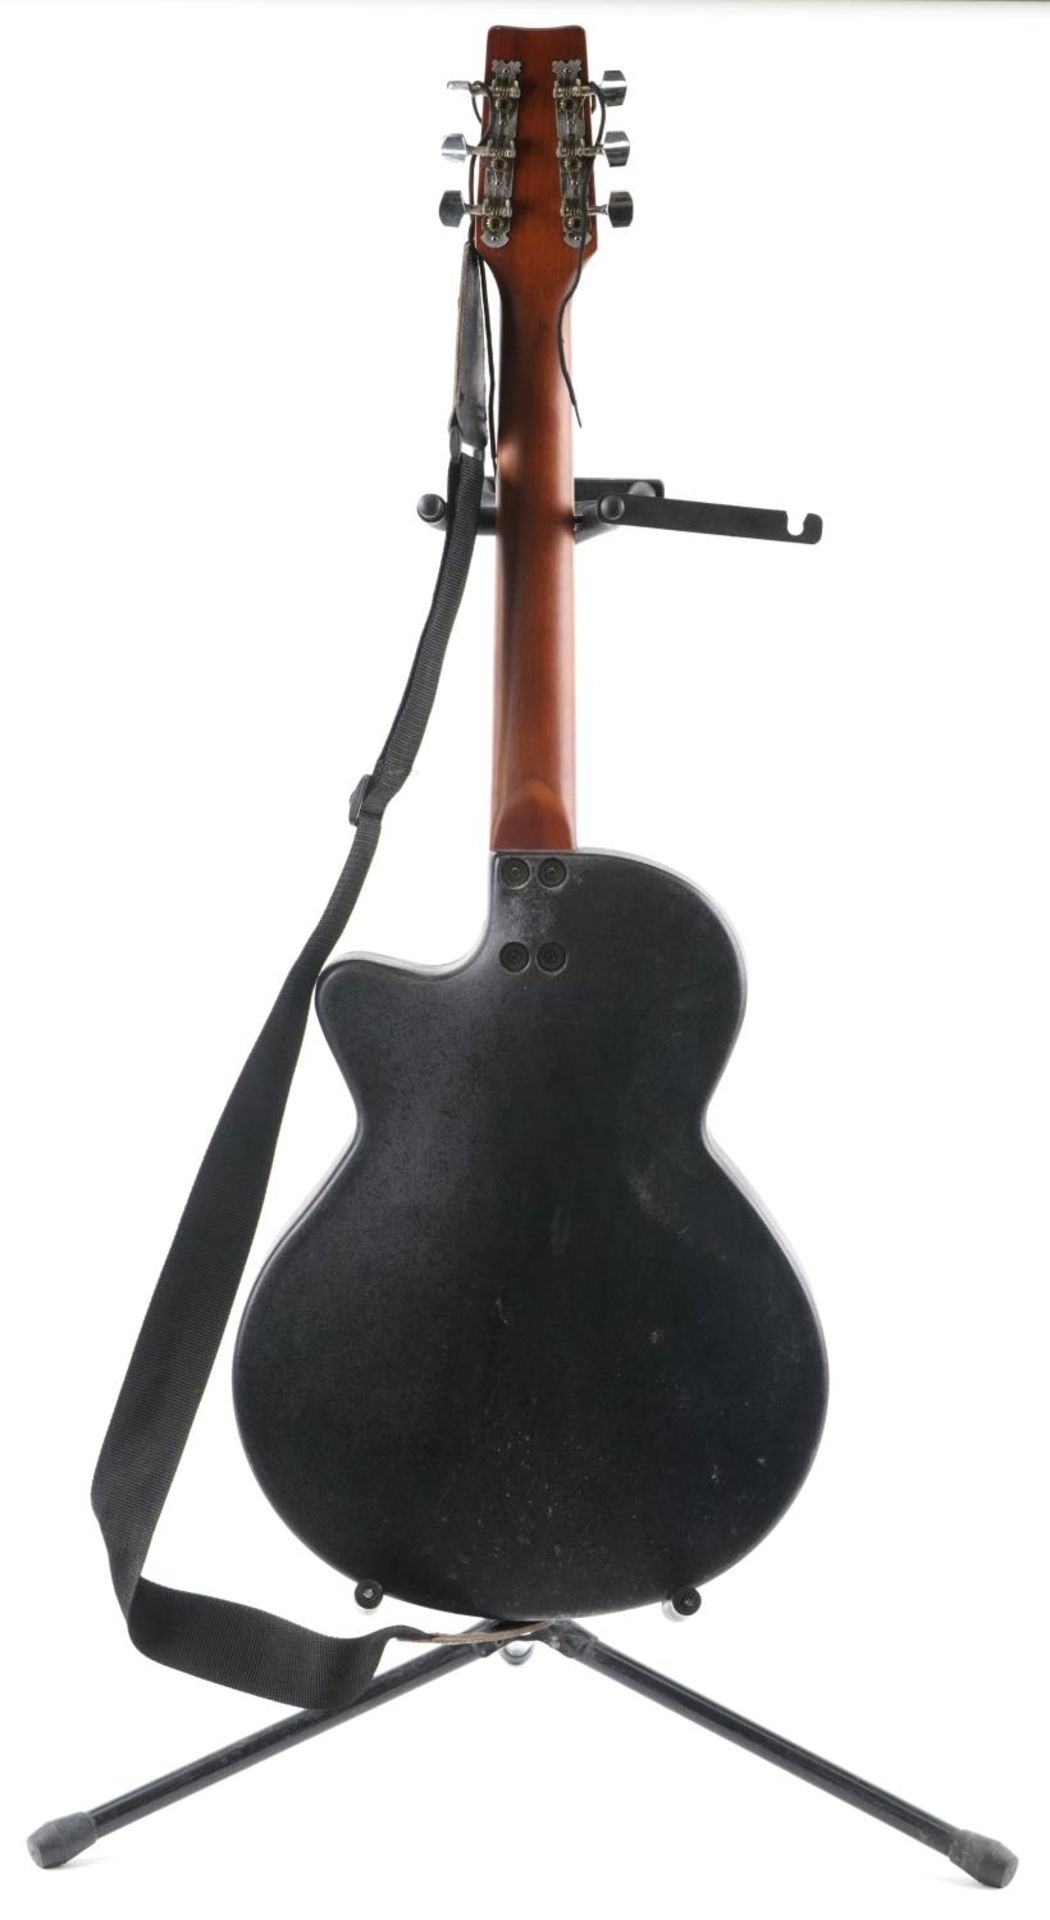 Melody six string acoustic guitar with Stagg guitar stand, the guitar 96cm in length - Bild 3 aus 6